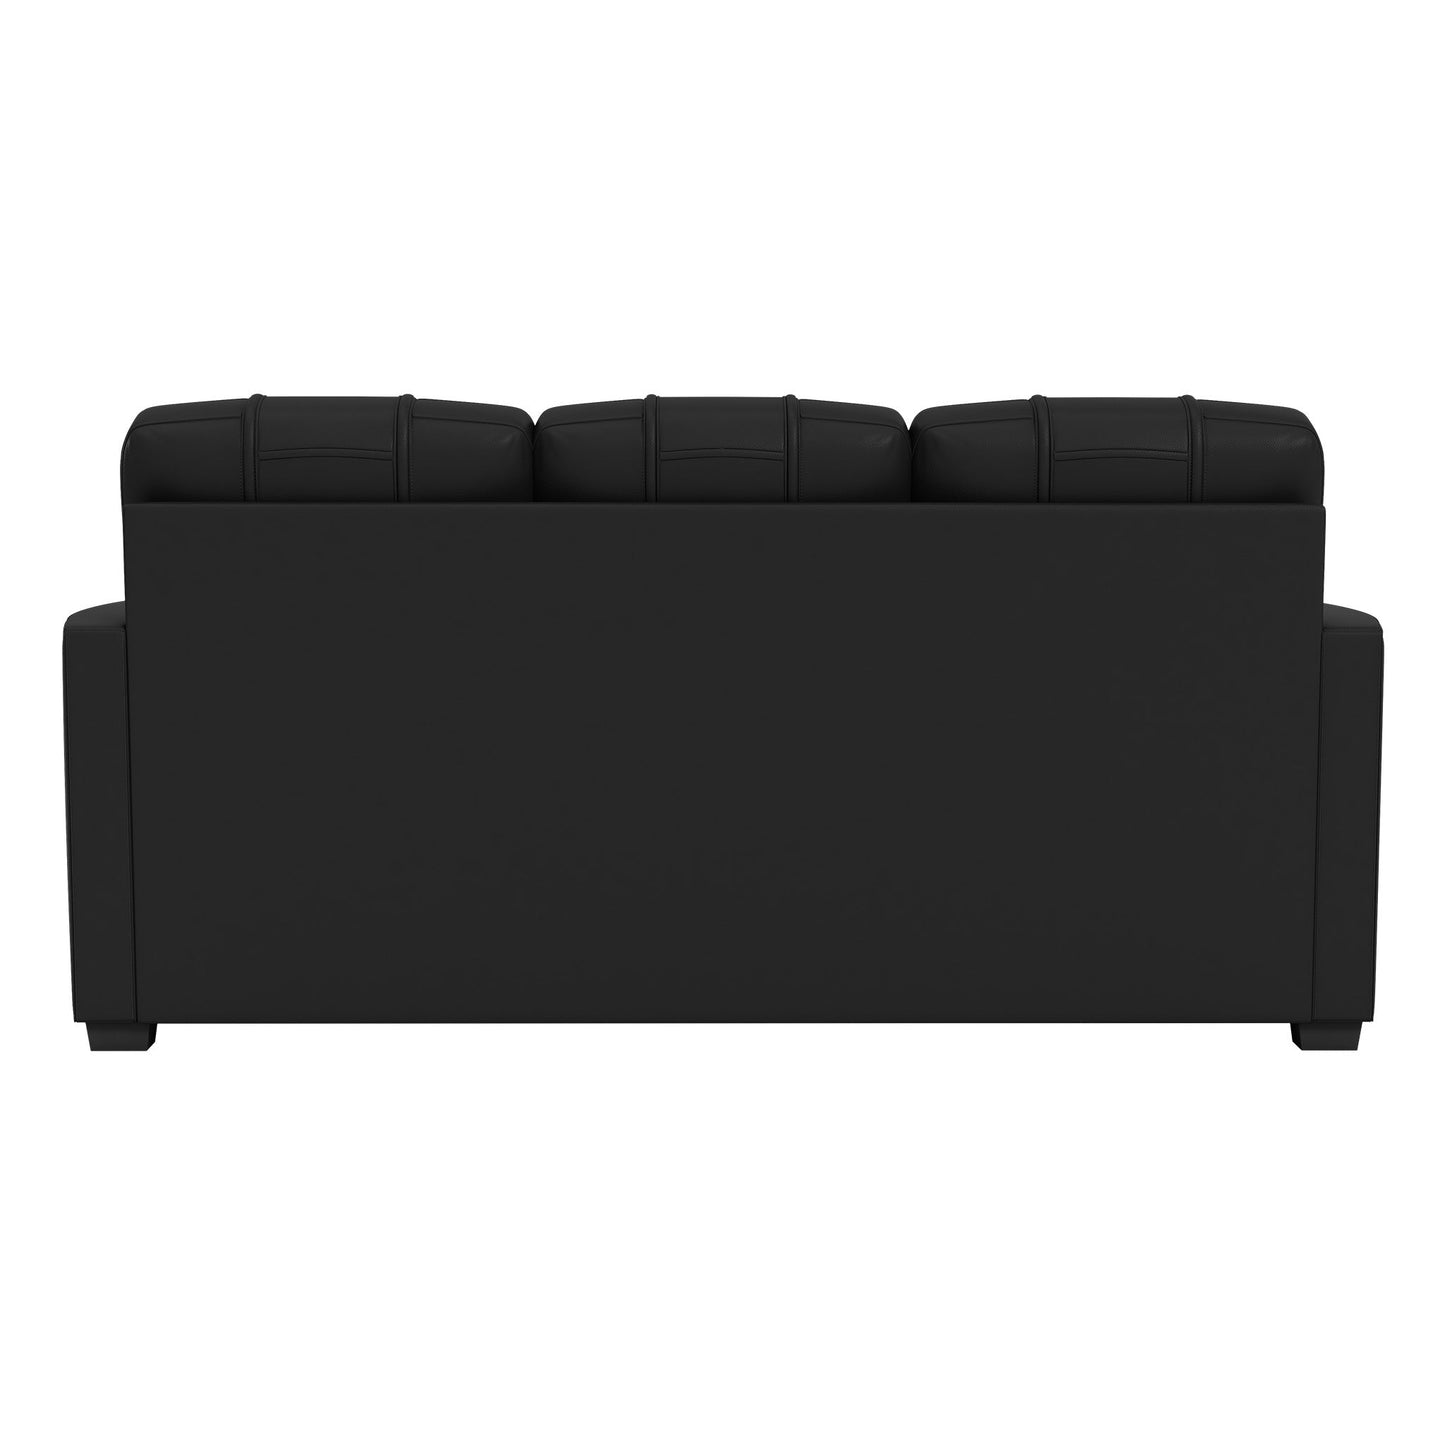 Silver Sofa with San Francisco Giants Champs'12